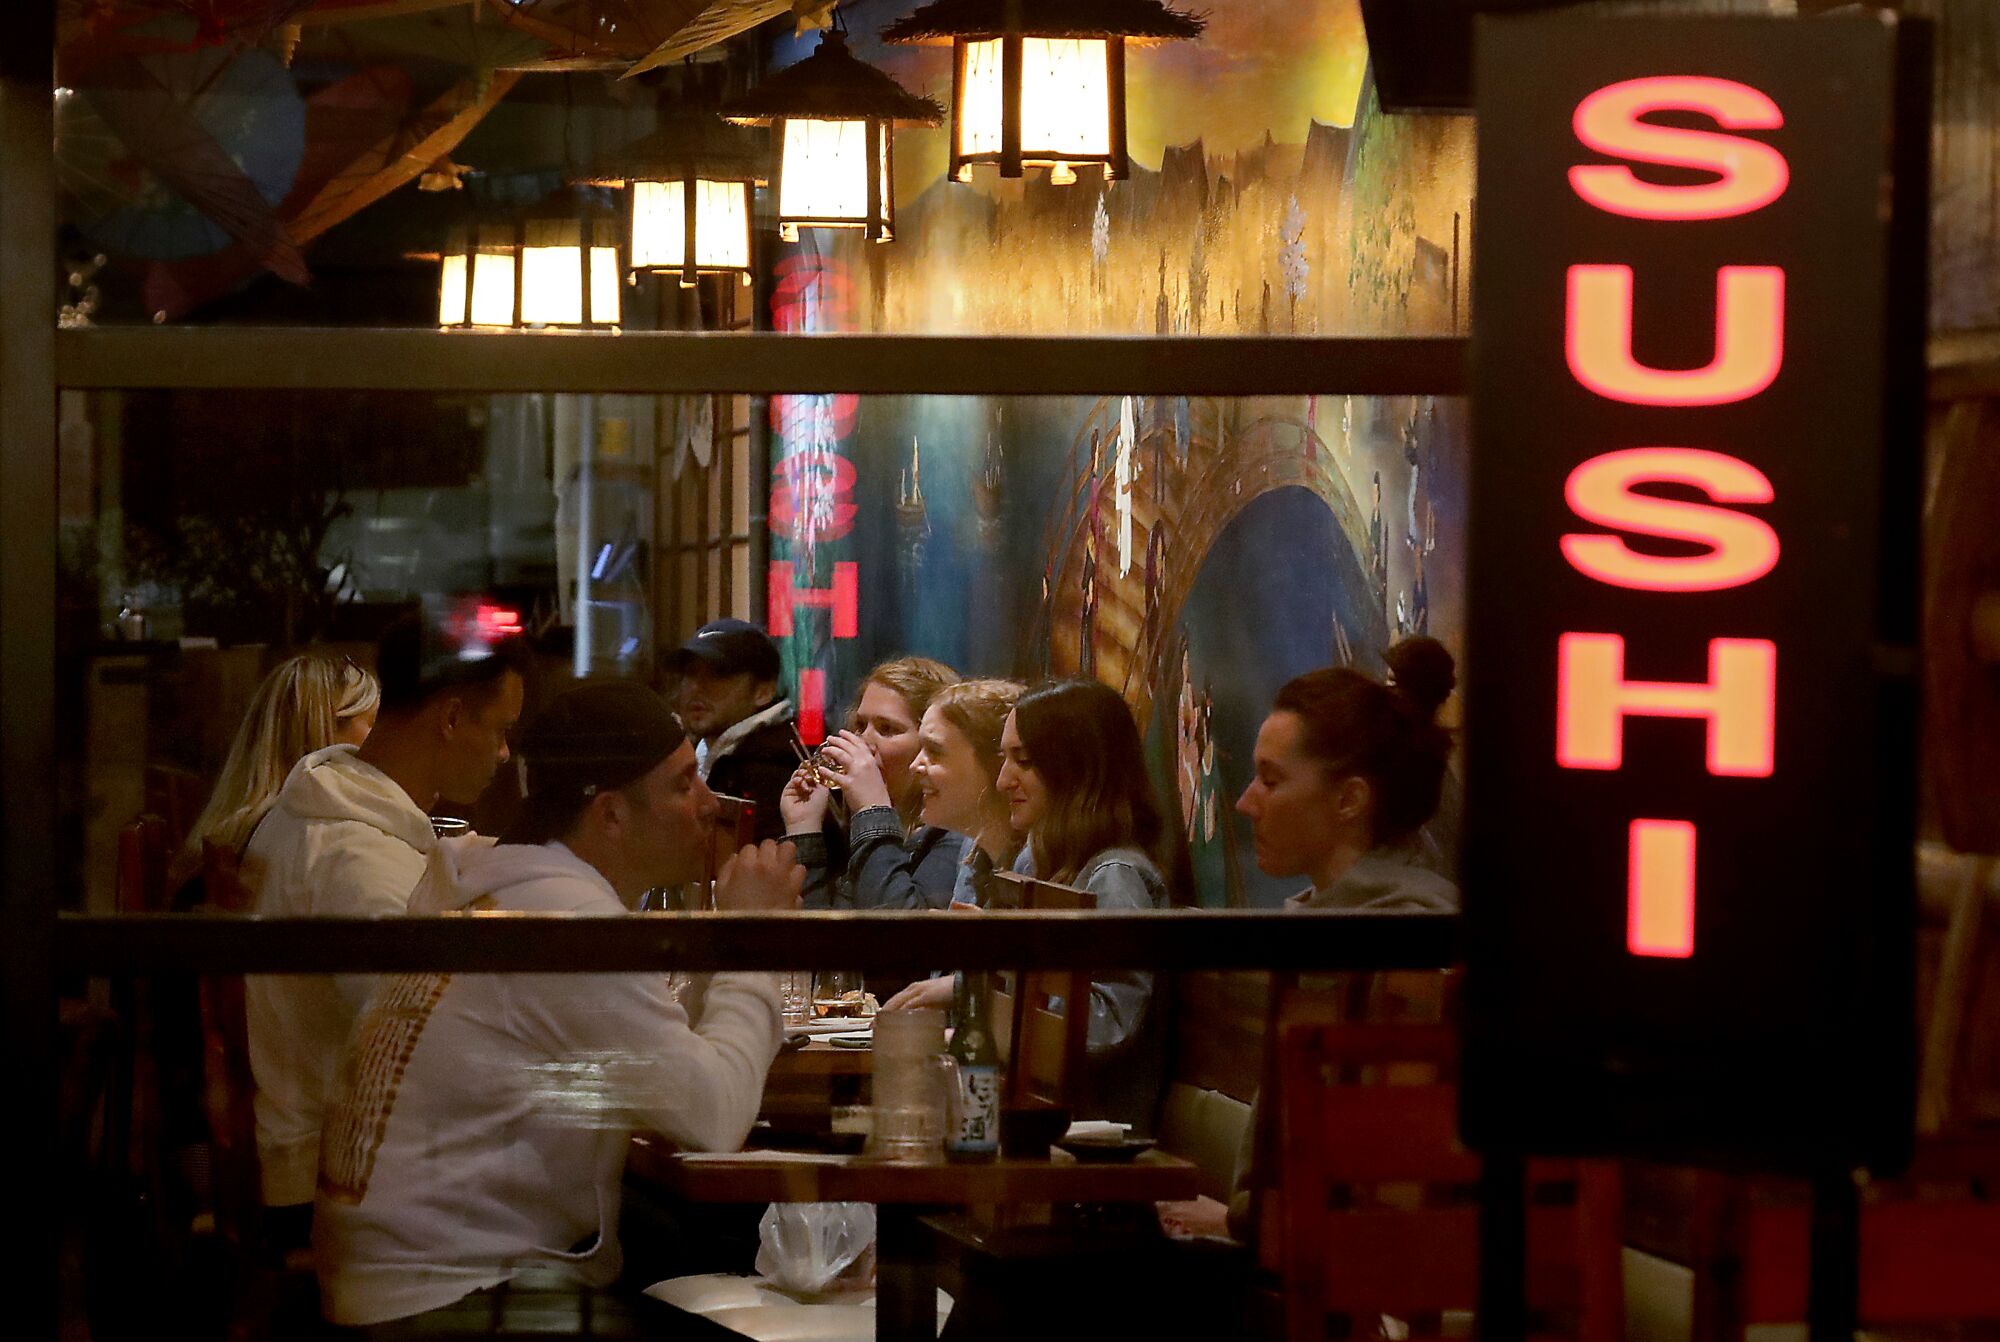 People are seated facing one another near a sign that reads Sushi 